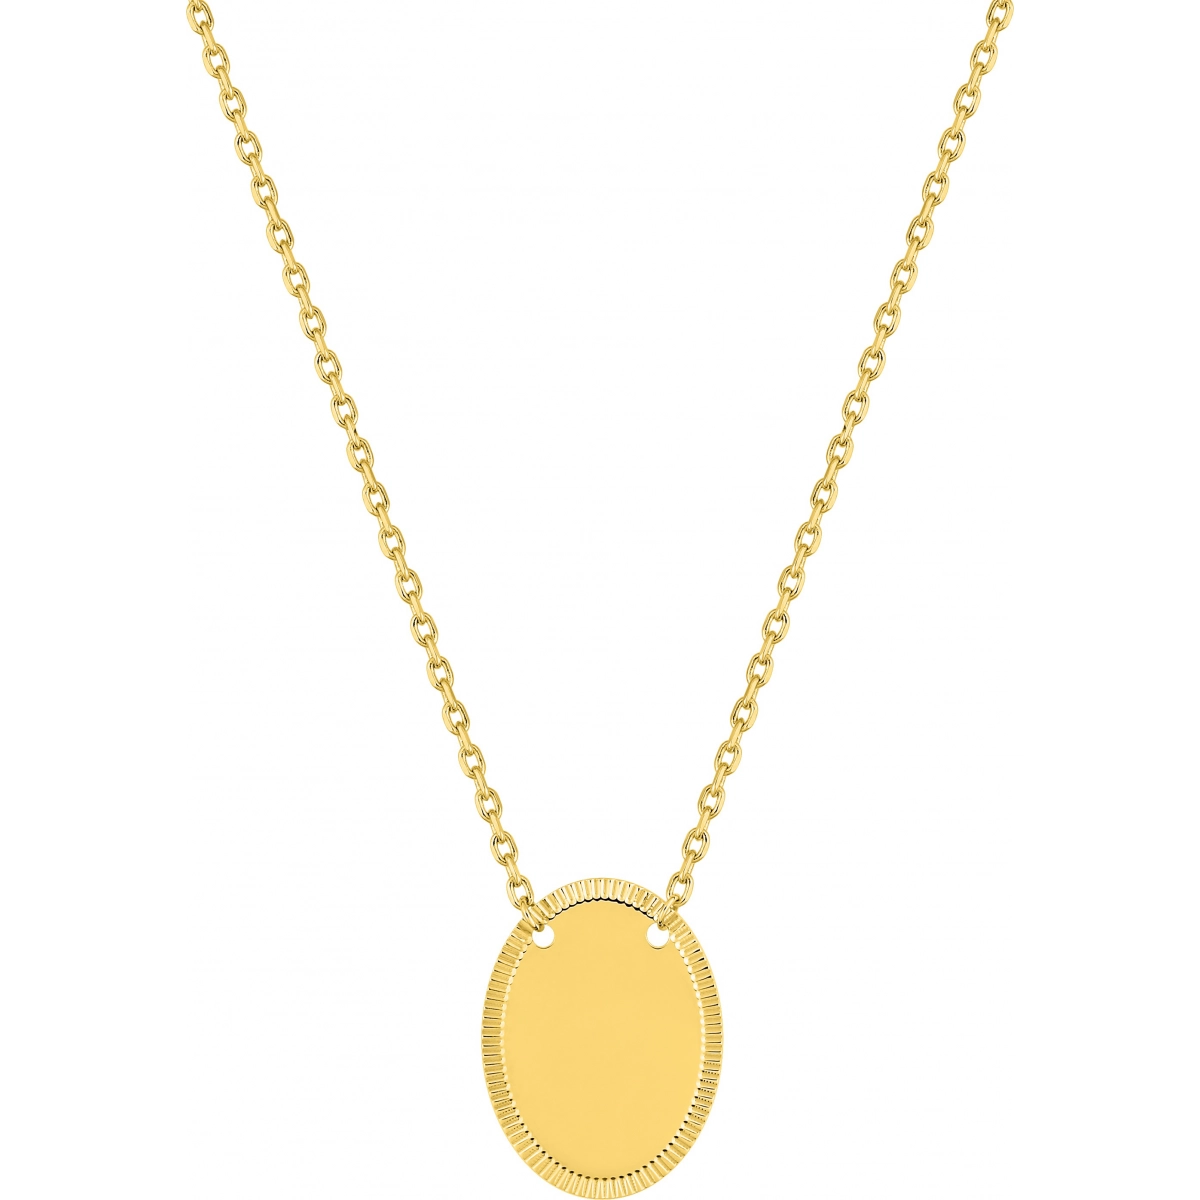 Necklace gold plated brass Lua Blanca  255830 